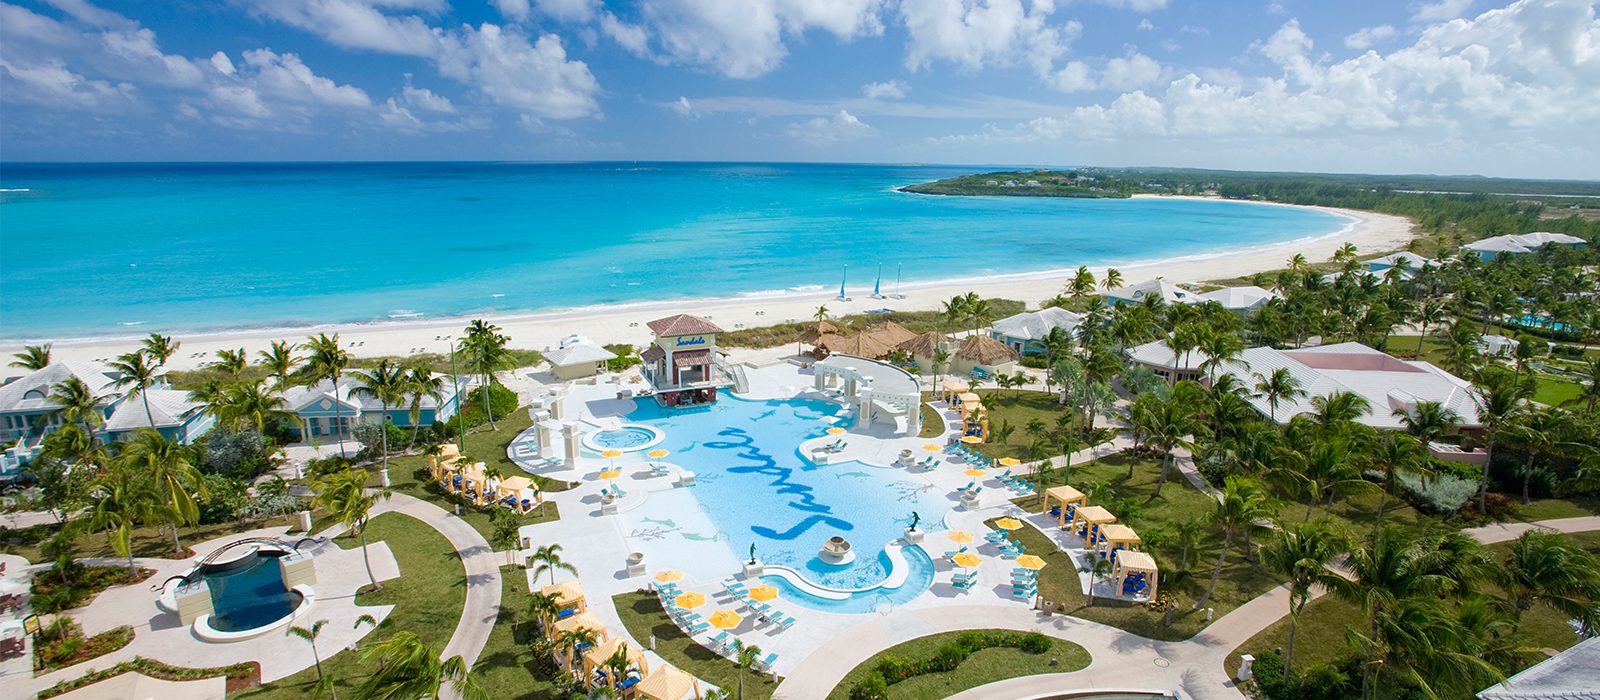 Luxury Bahamas Holiday Packages Sandals Emerald Bay Header